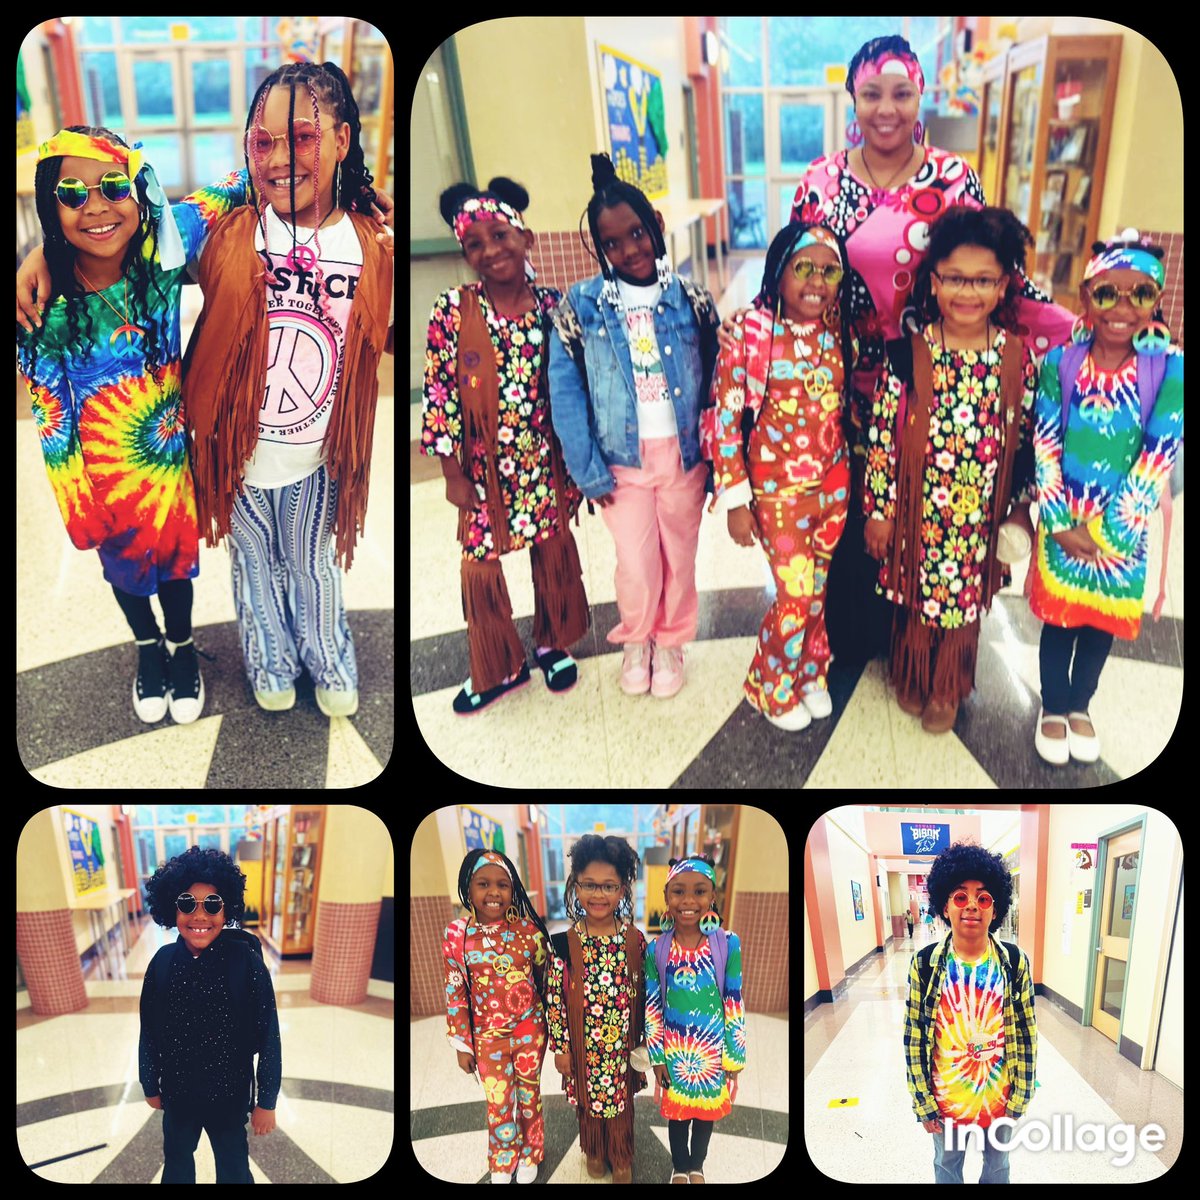 Our scholars looked groovy for 70’s Day @Thompsonhisd. @TheBrameE @SamuelBrazielSr @nwhite4002 @ChanteGary